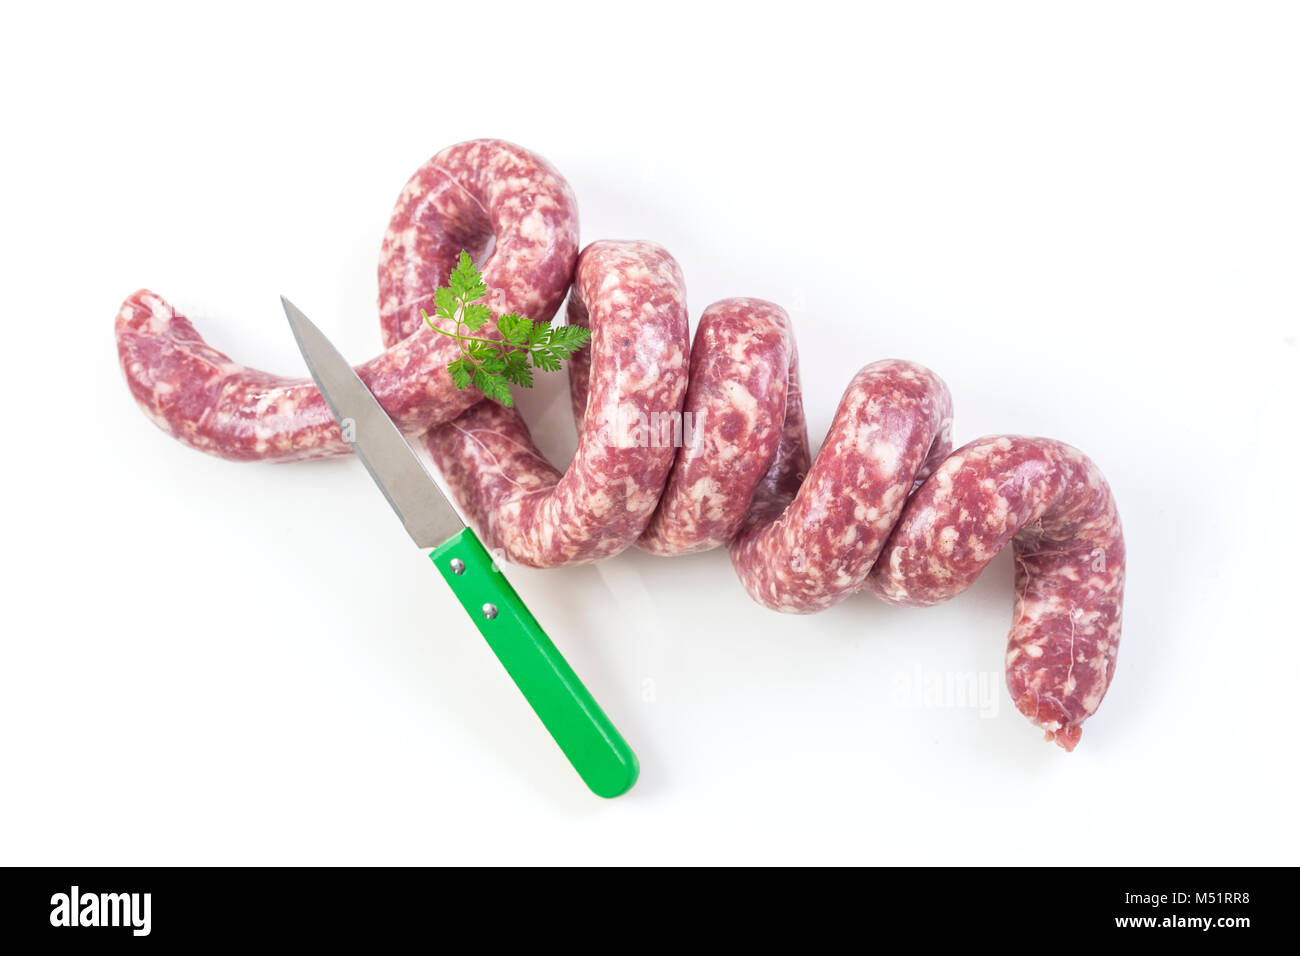 Toulouse sausage Raw 'saucisse de toulouse' twisted f,rench meat specialty from Toulouse on white Stock Photo